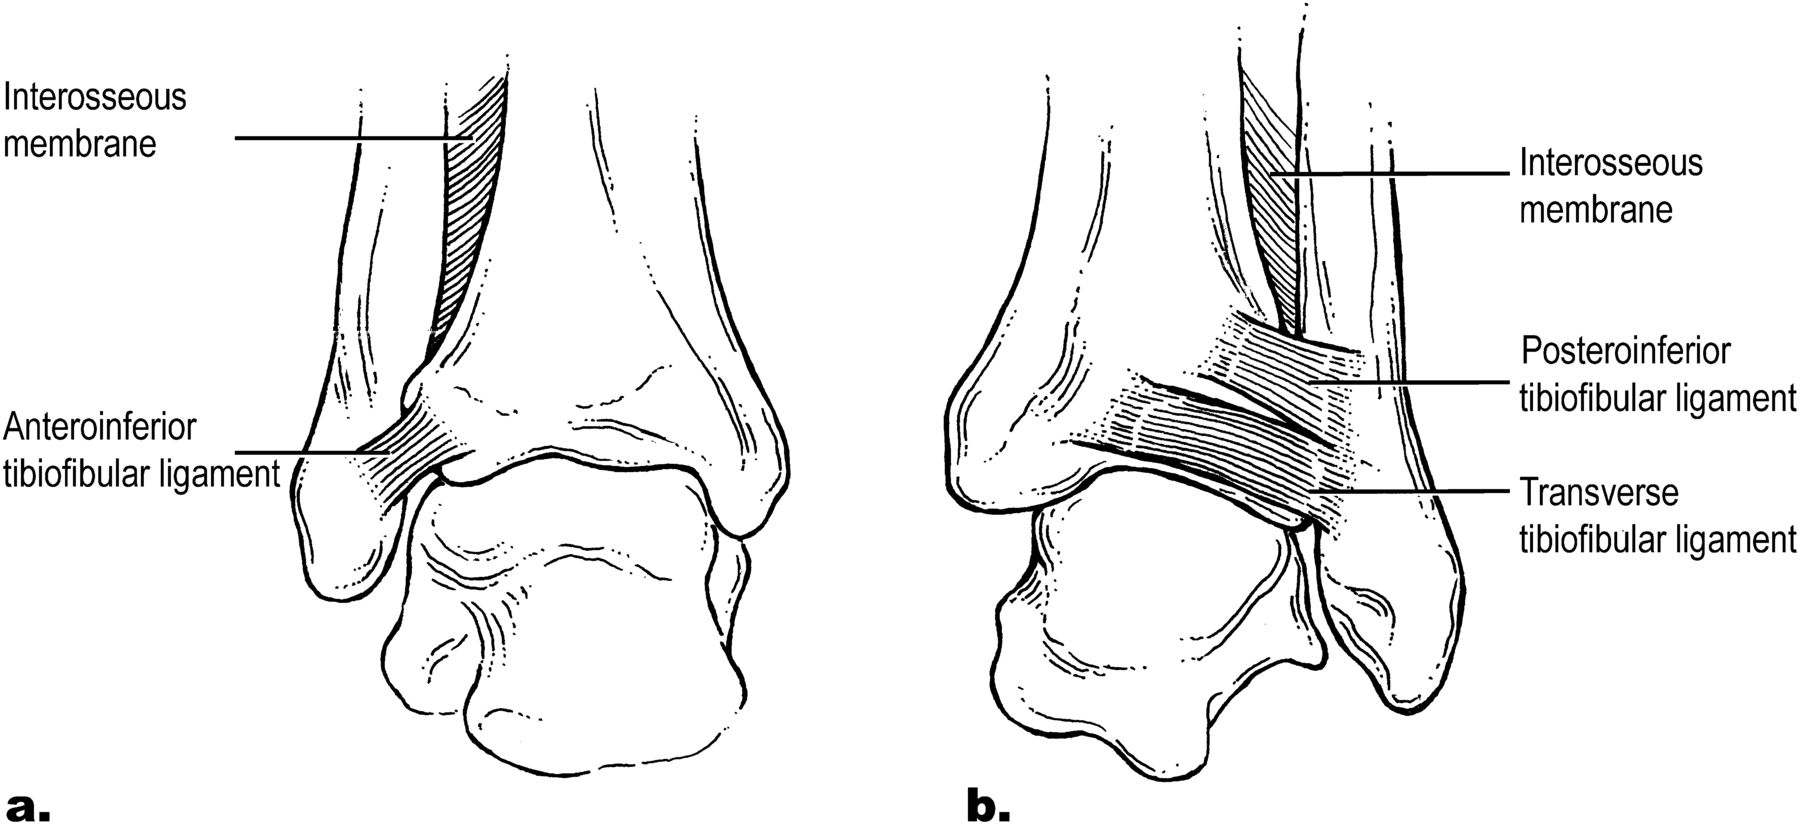 Syndesmosis ligaments.jpg